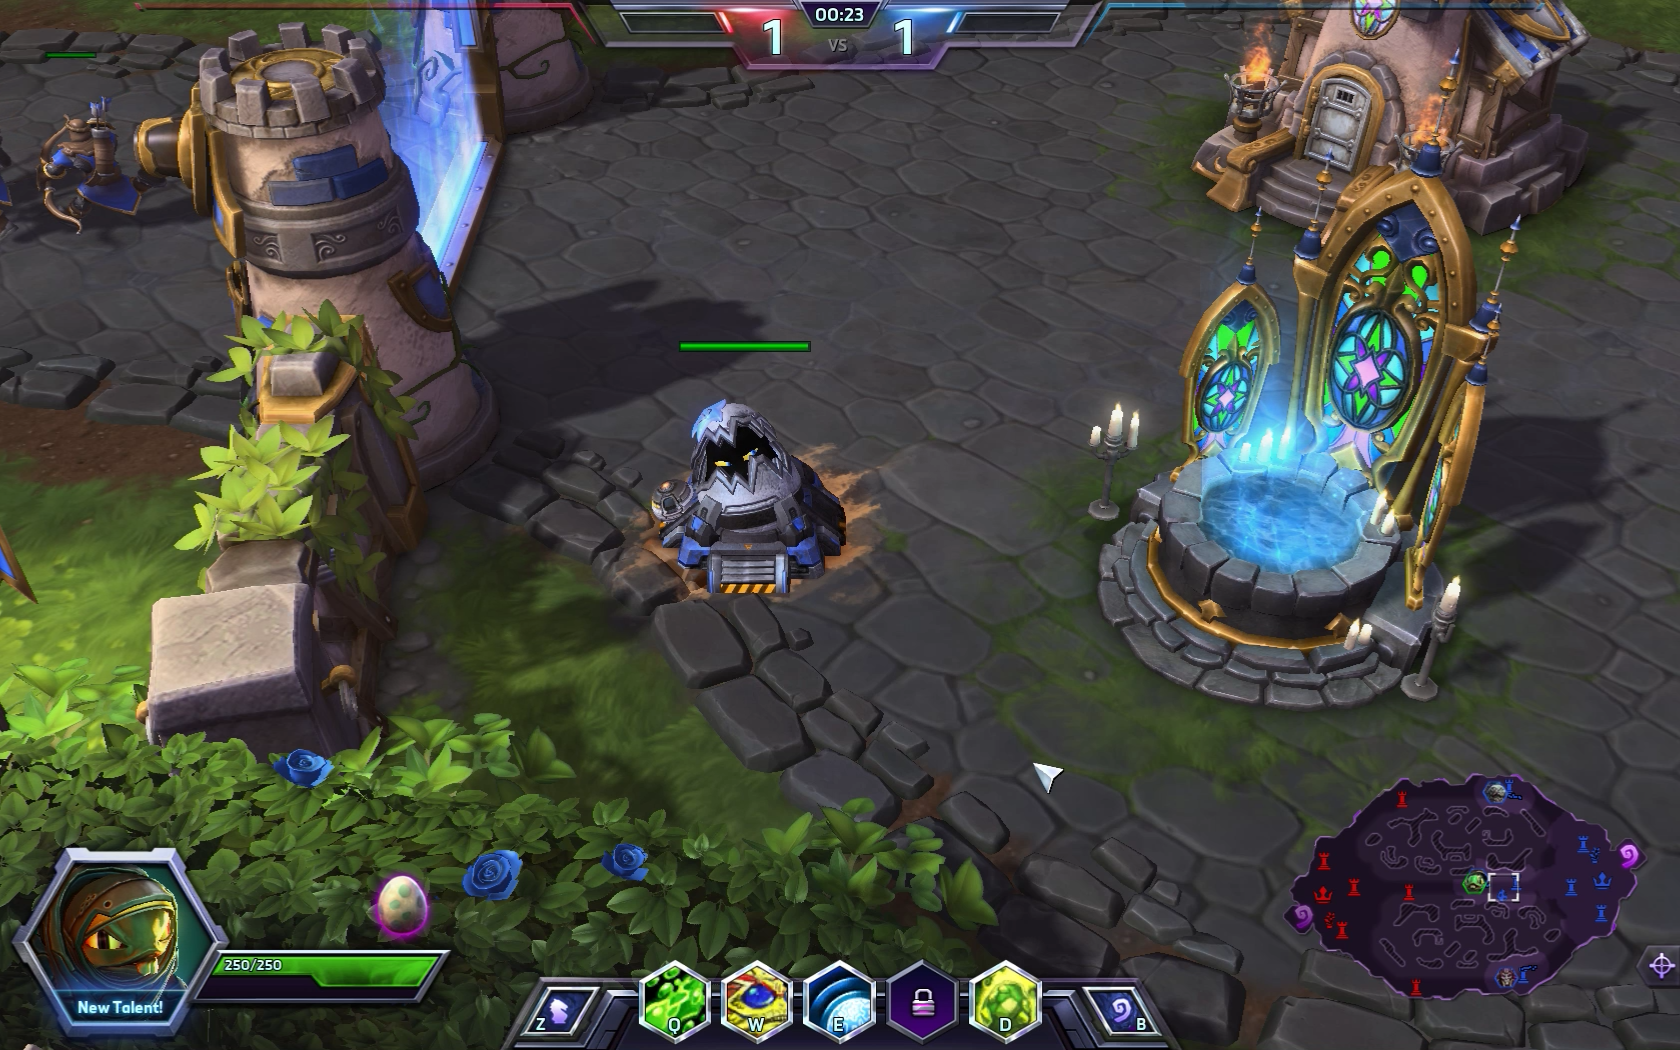 Heroes of the Storm: Murky Trailer 